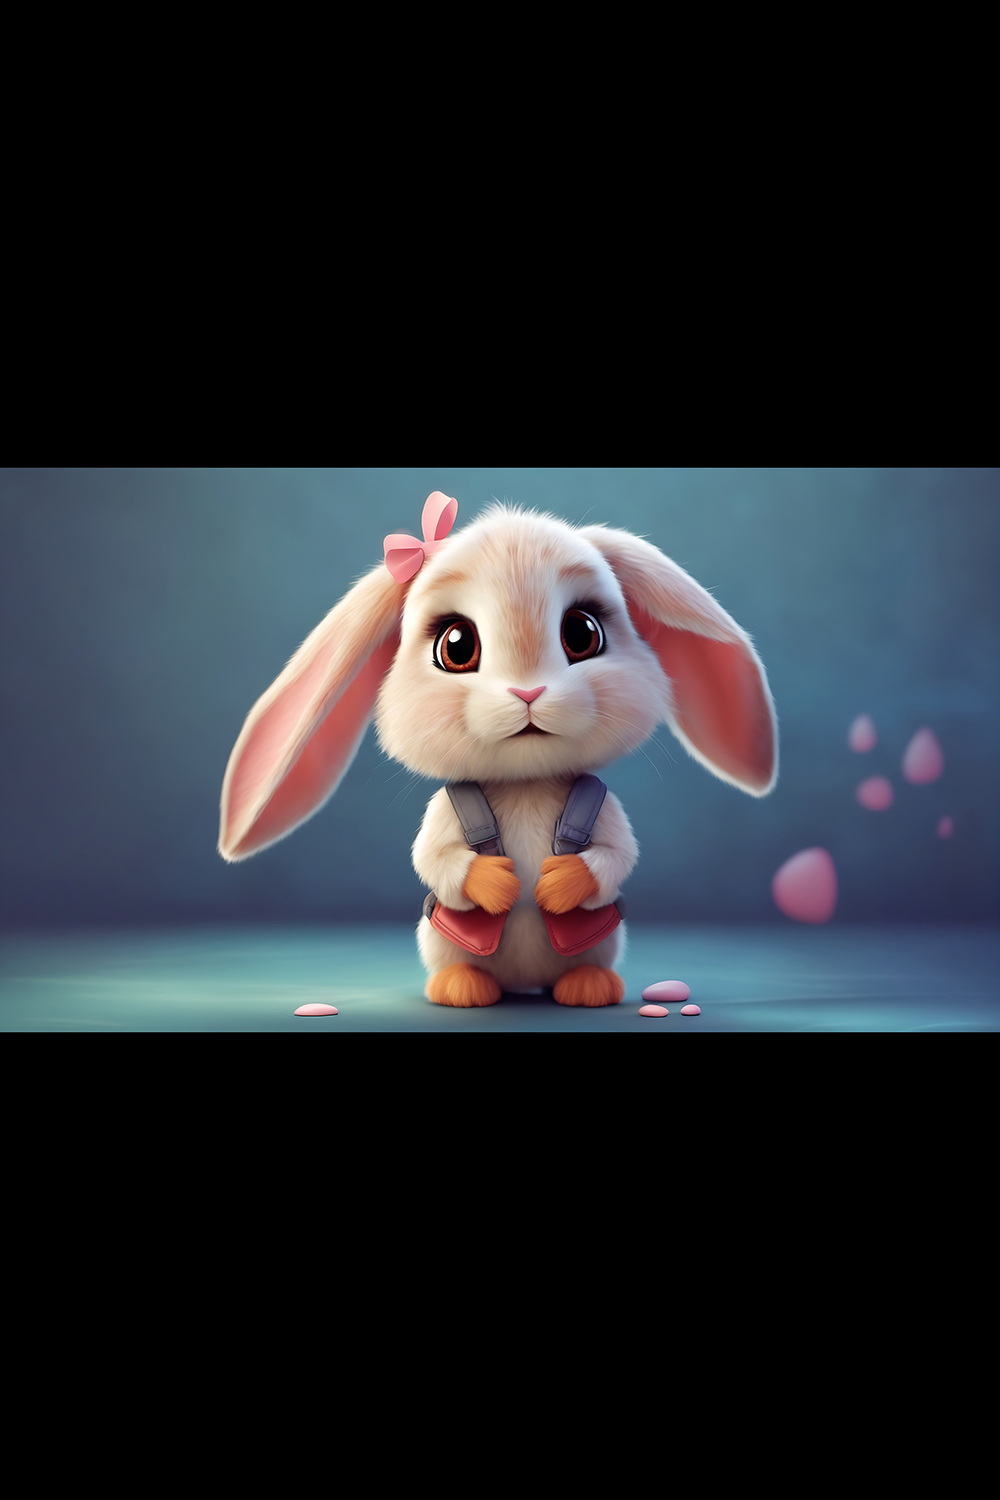 Cute Pixar style pink baby rabbit standing on a abstruct background - ai generated pinterest preview image.